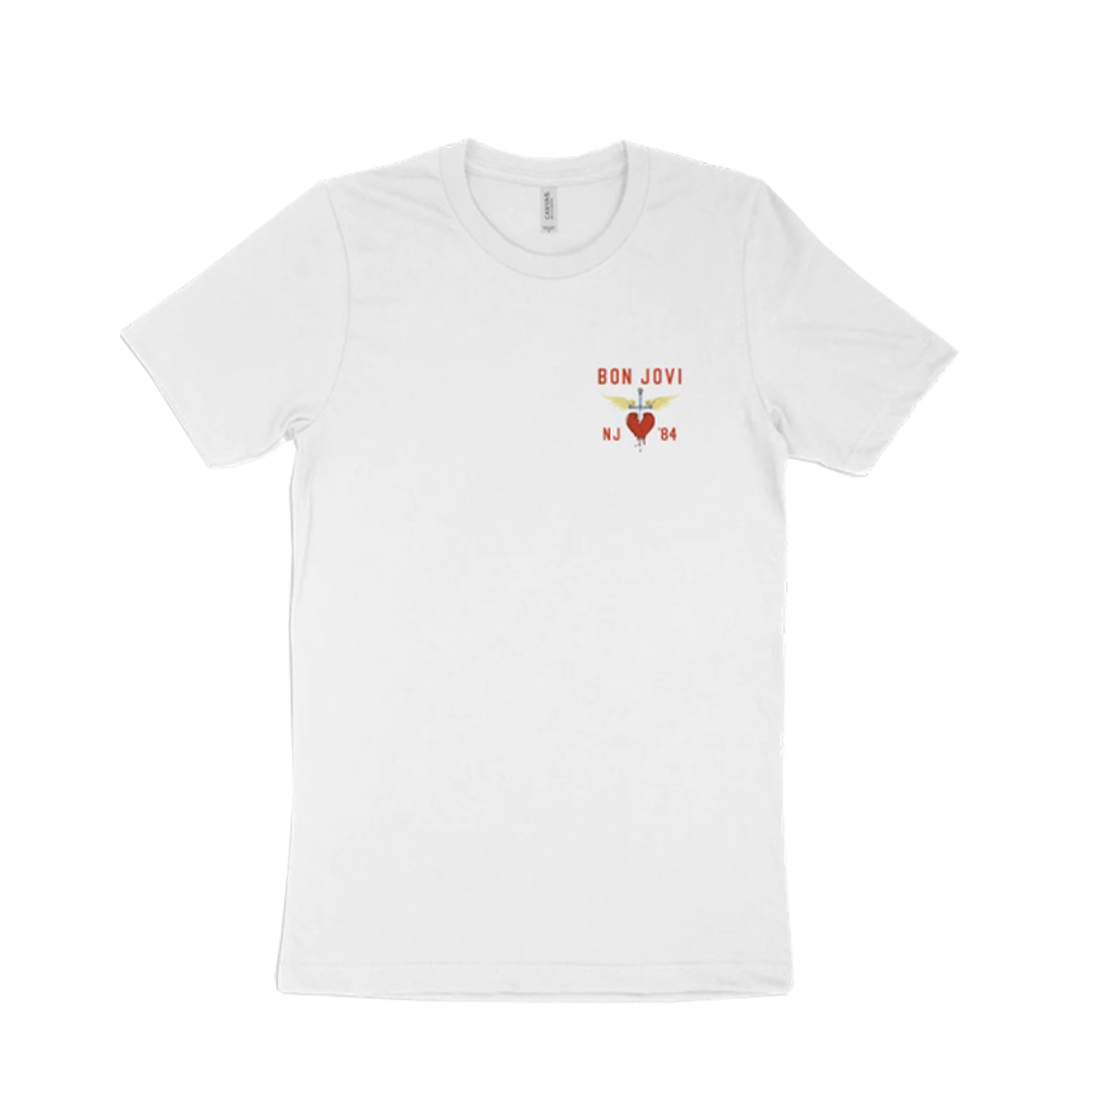 You Give Love A Bad Name T-Shirt Front